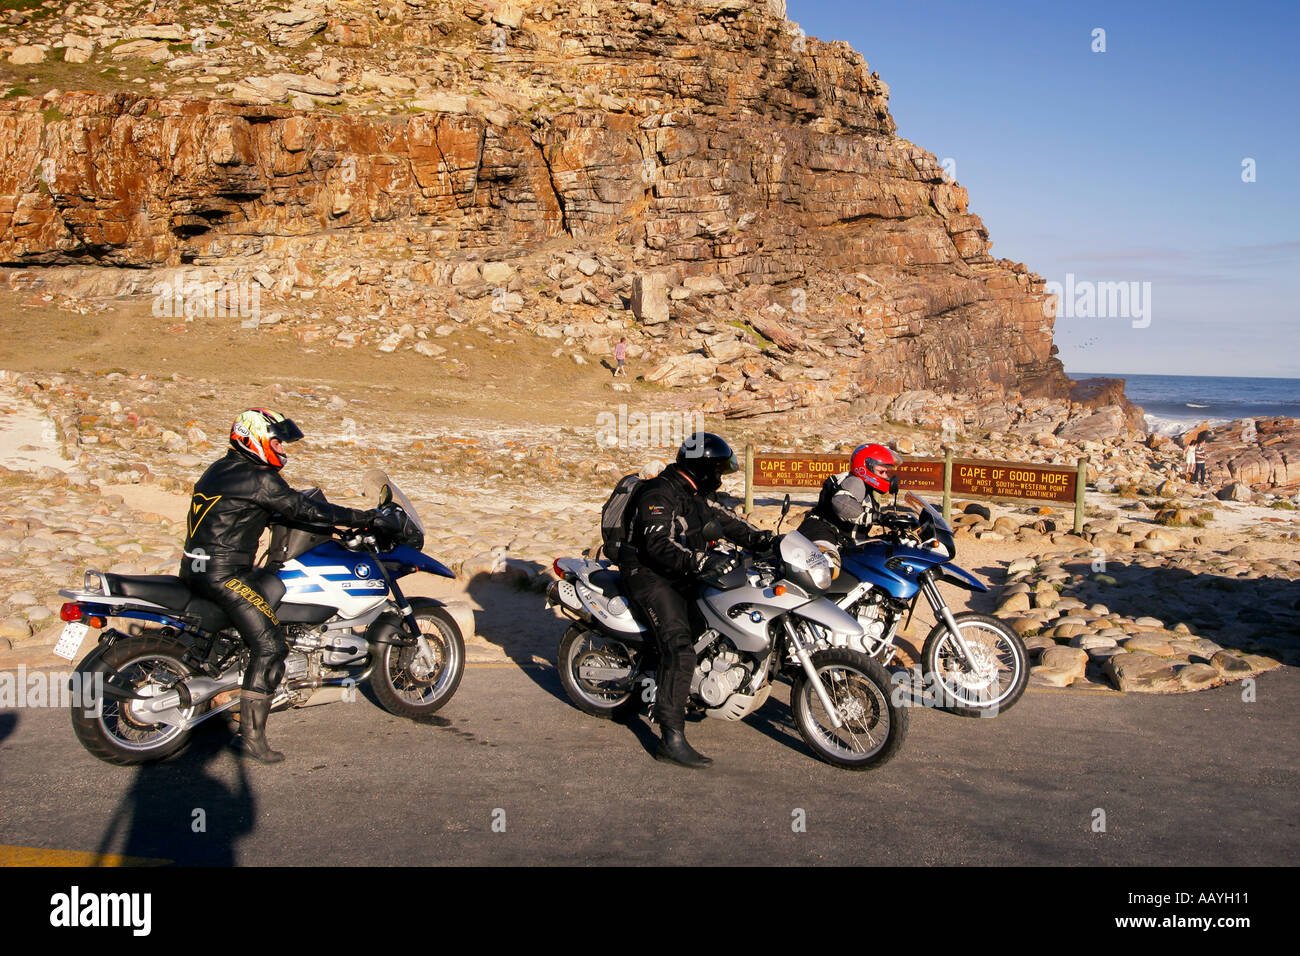 south africa cape of good hope group of motocylclists Stock Photo